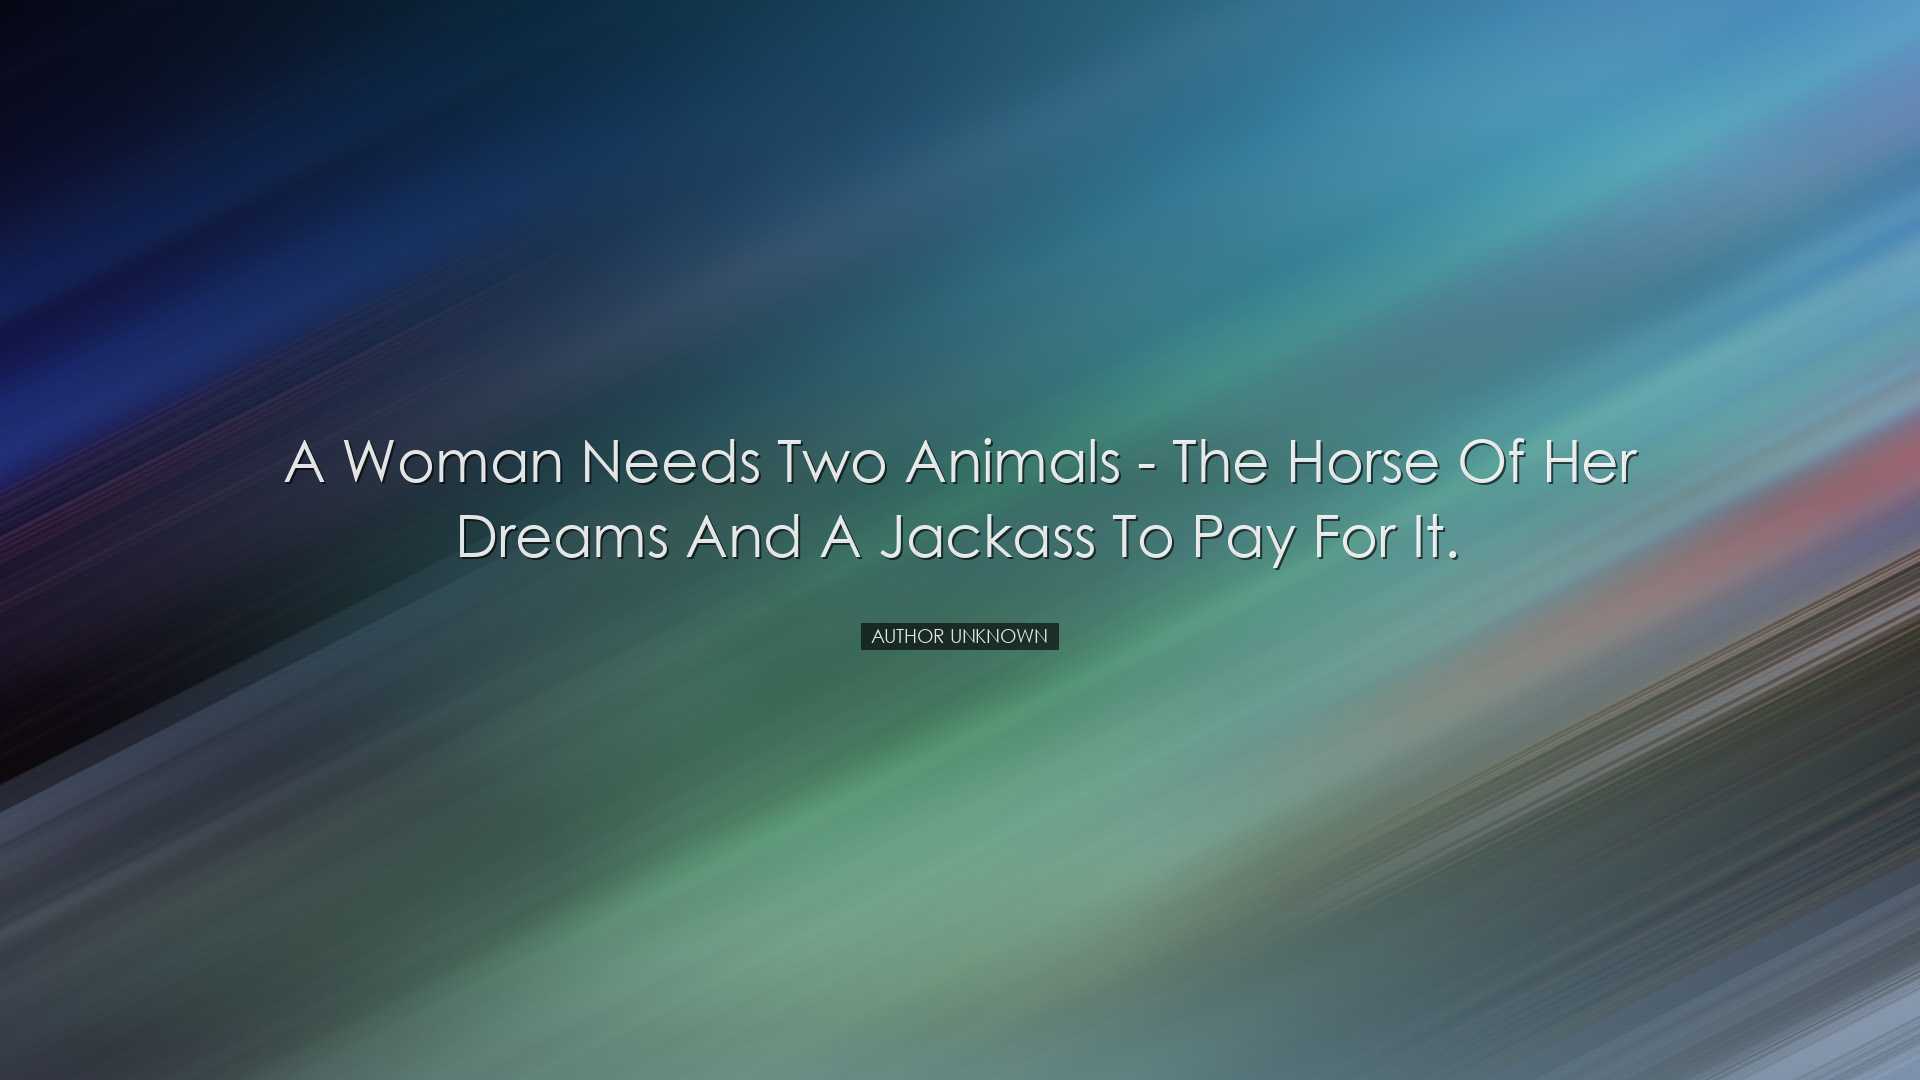 A woman needs two animals - the horse of her dreams and a jackass